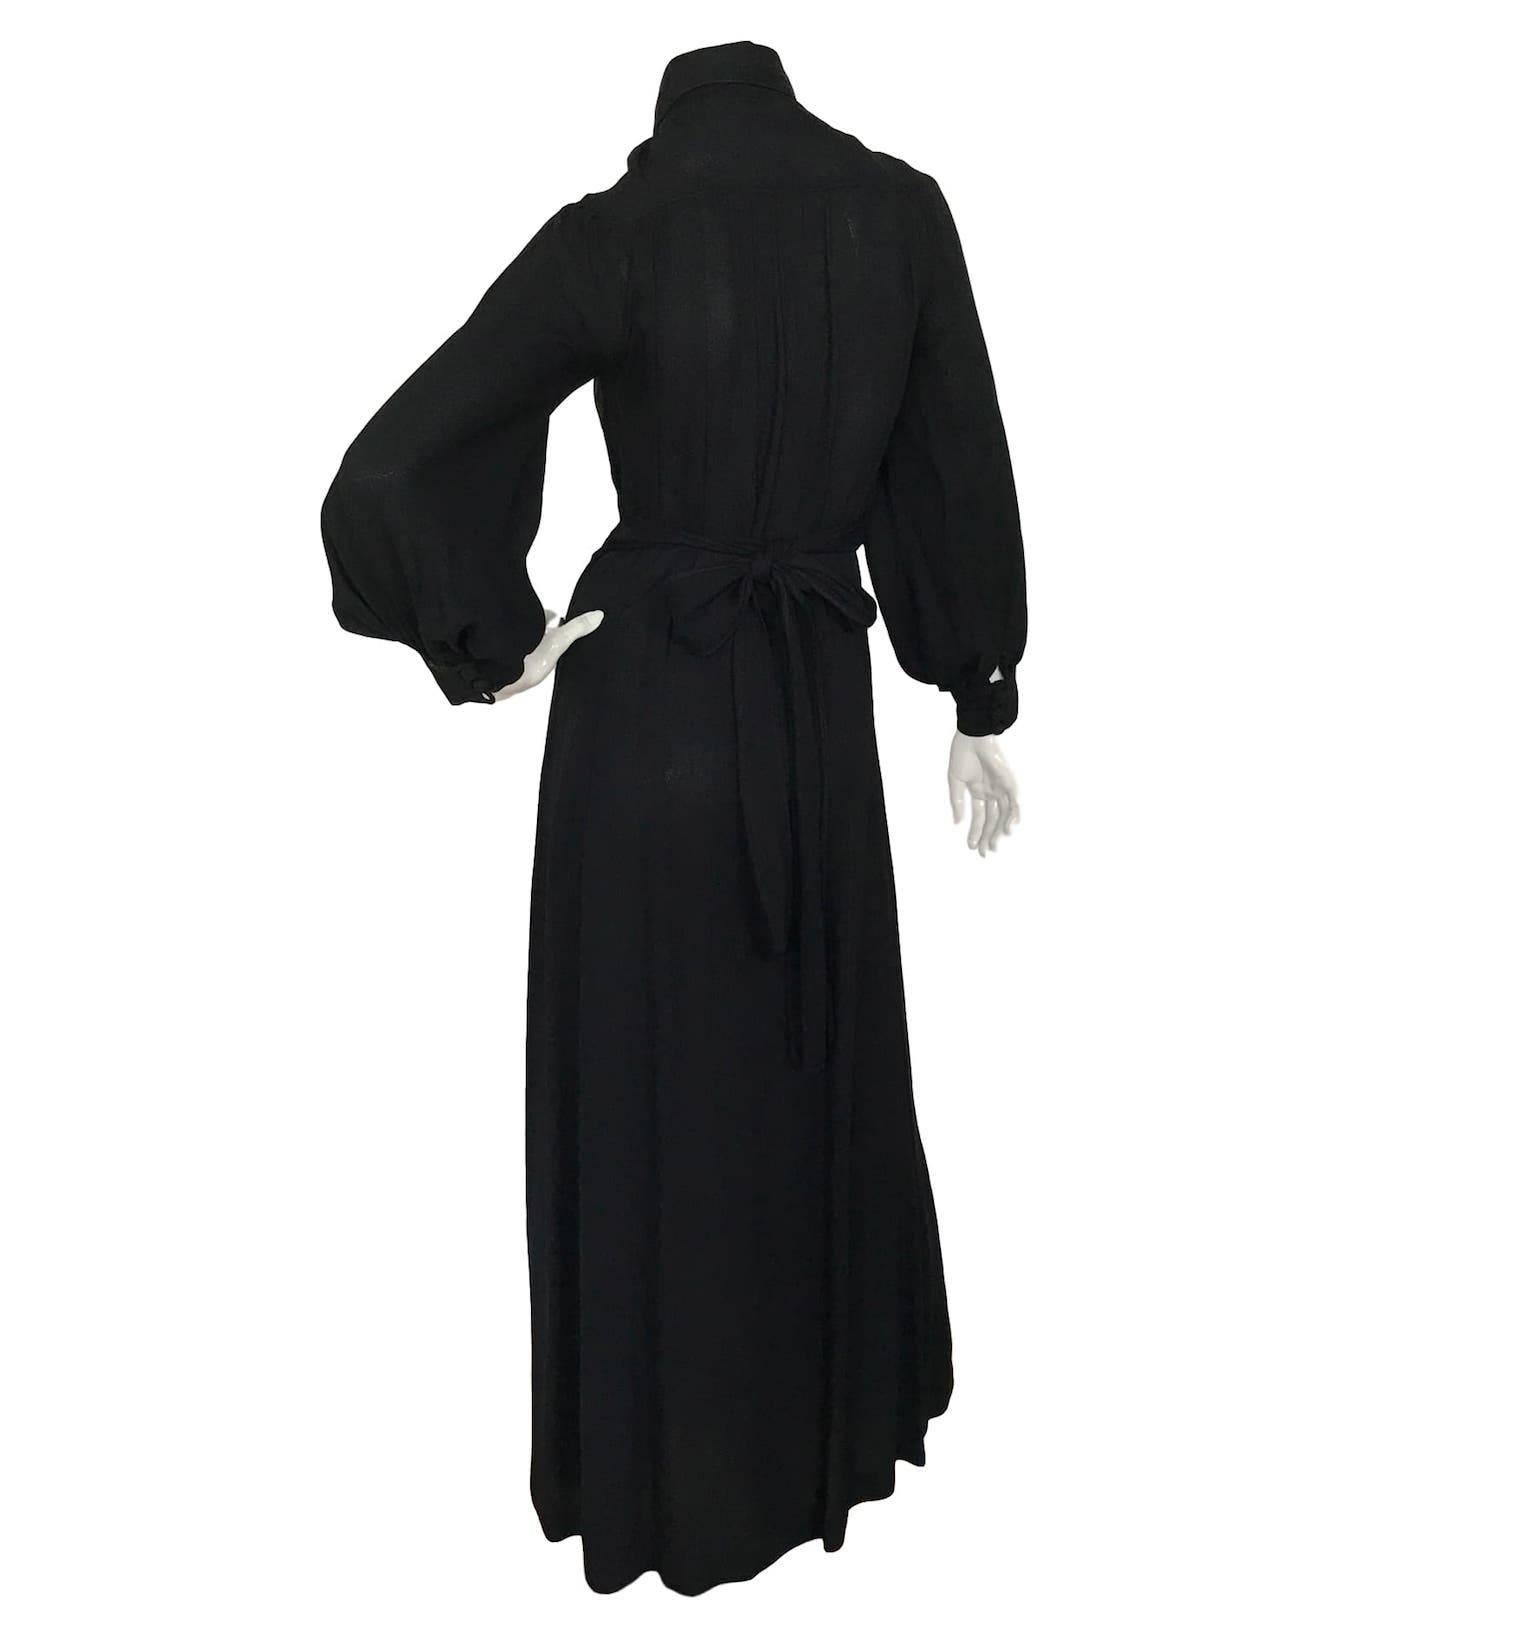 Ossie Clark for Radley black moss crepe dress. With button front fastening, penny collar and poet sleeves. Measures 32 inch bust and 58 inches length 
In very good condition, with a button missing.